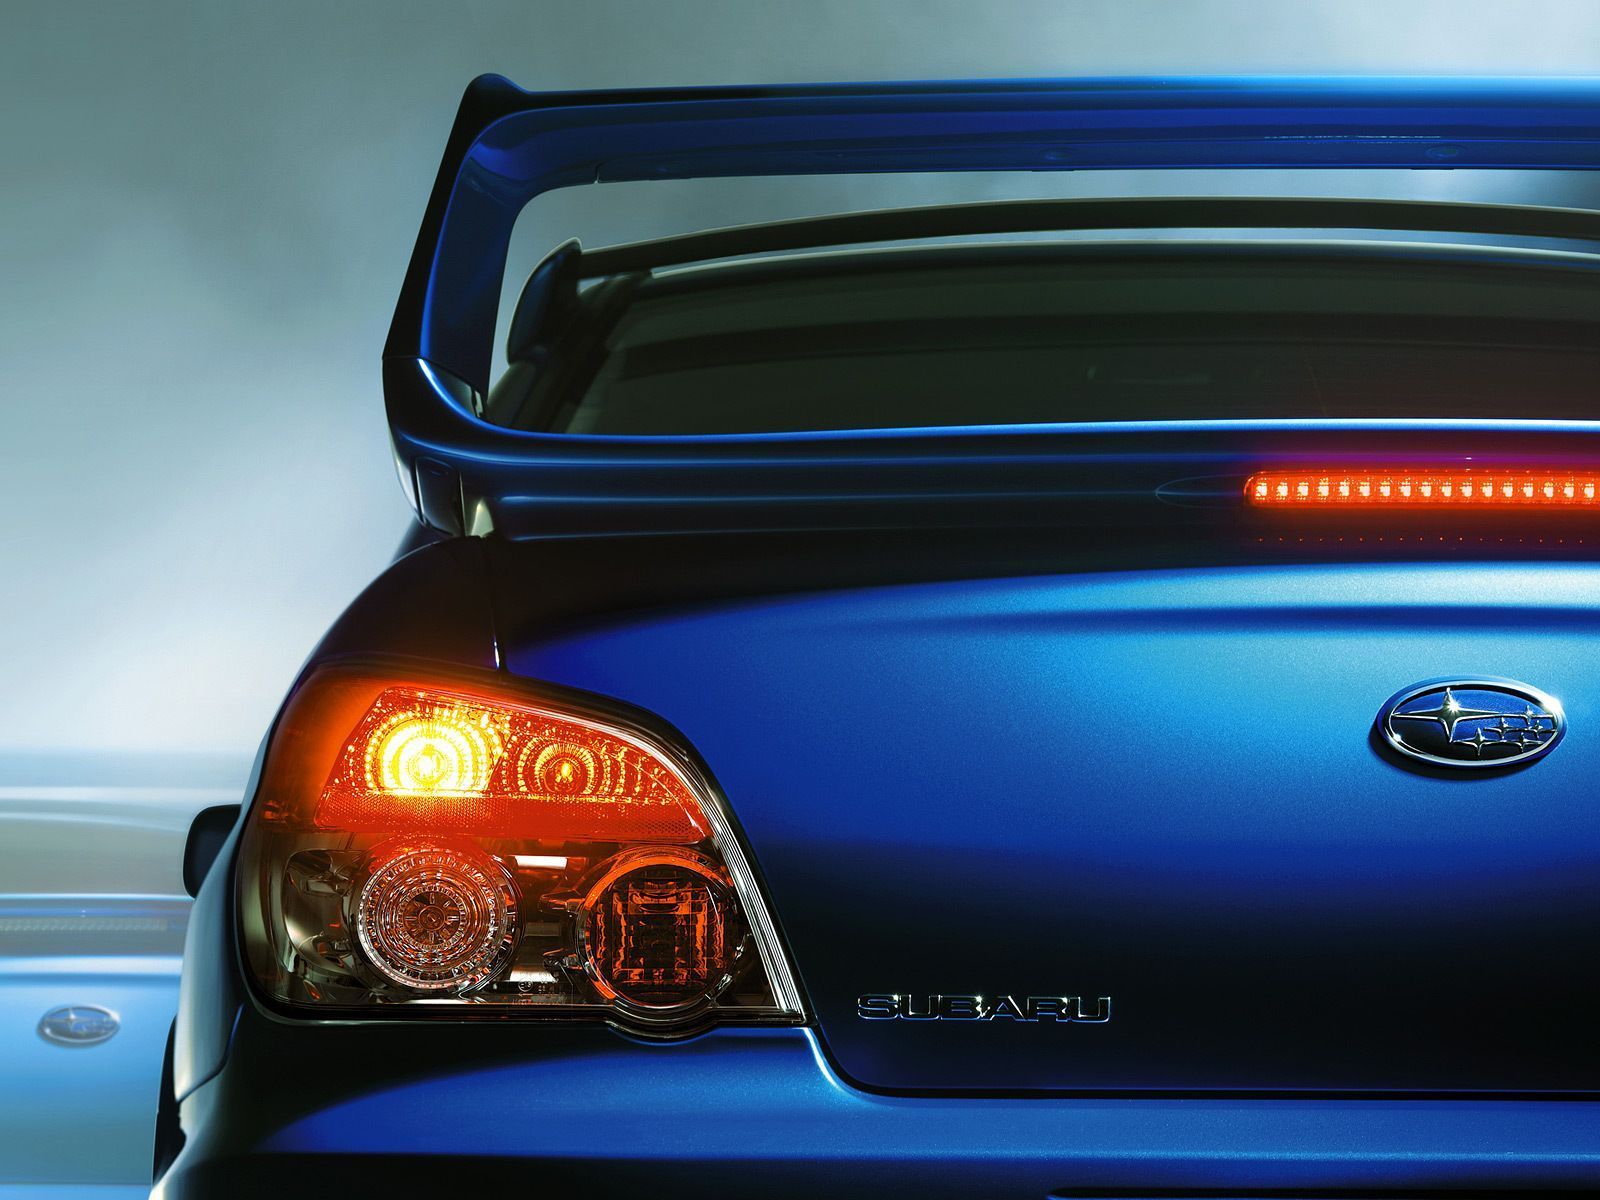 61 Subaru HD Wallpapers | Backgrounds - Wallpaper Abyss